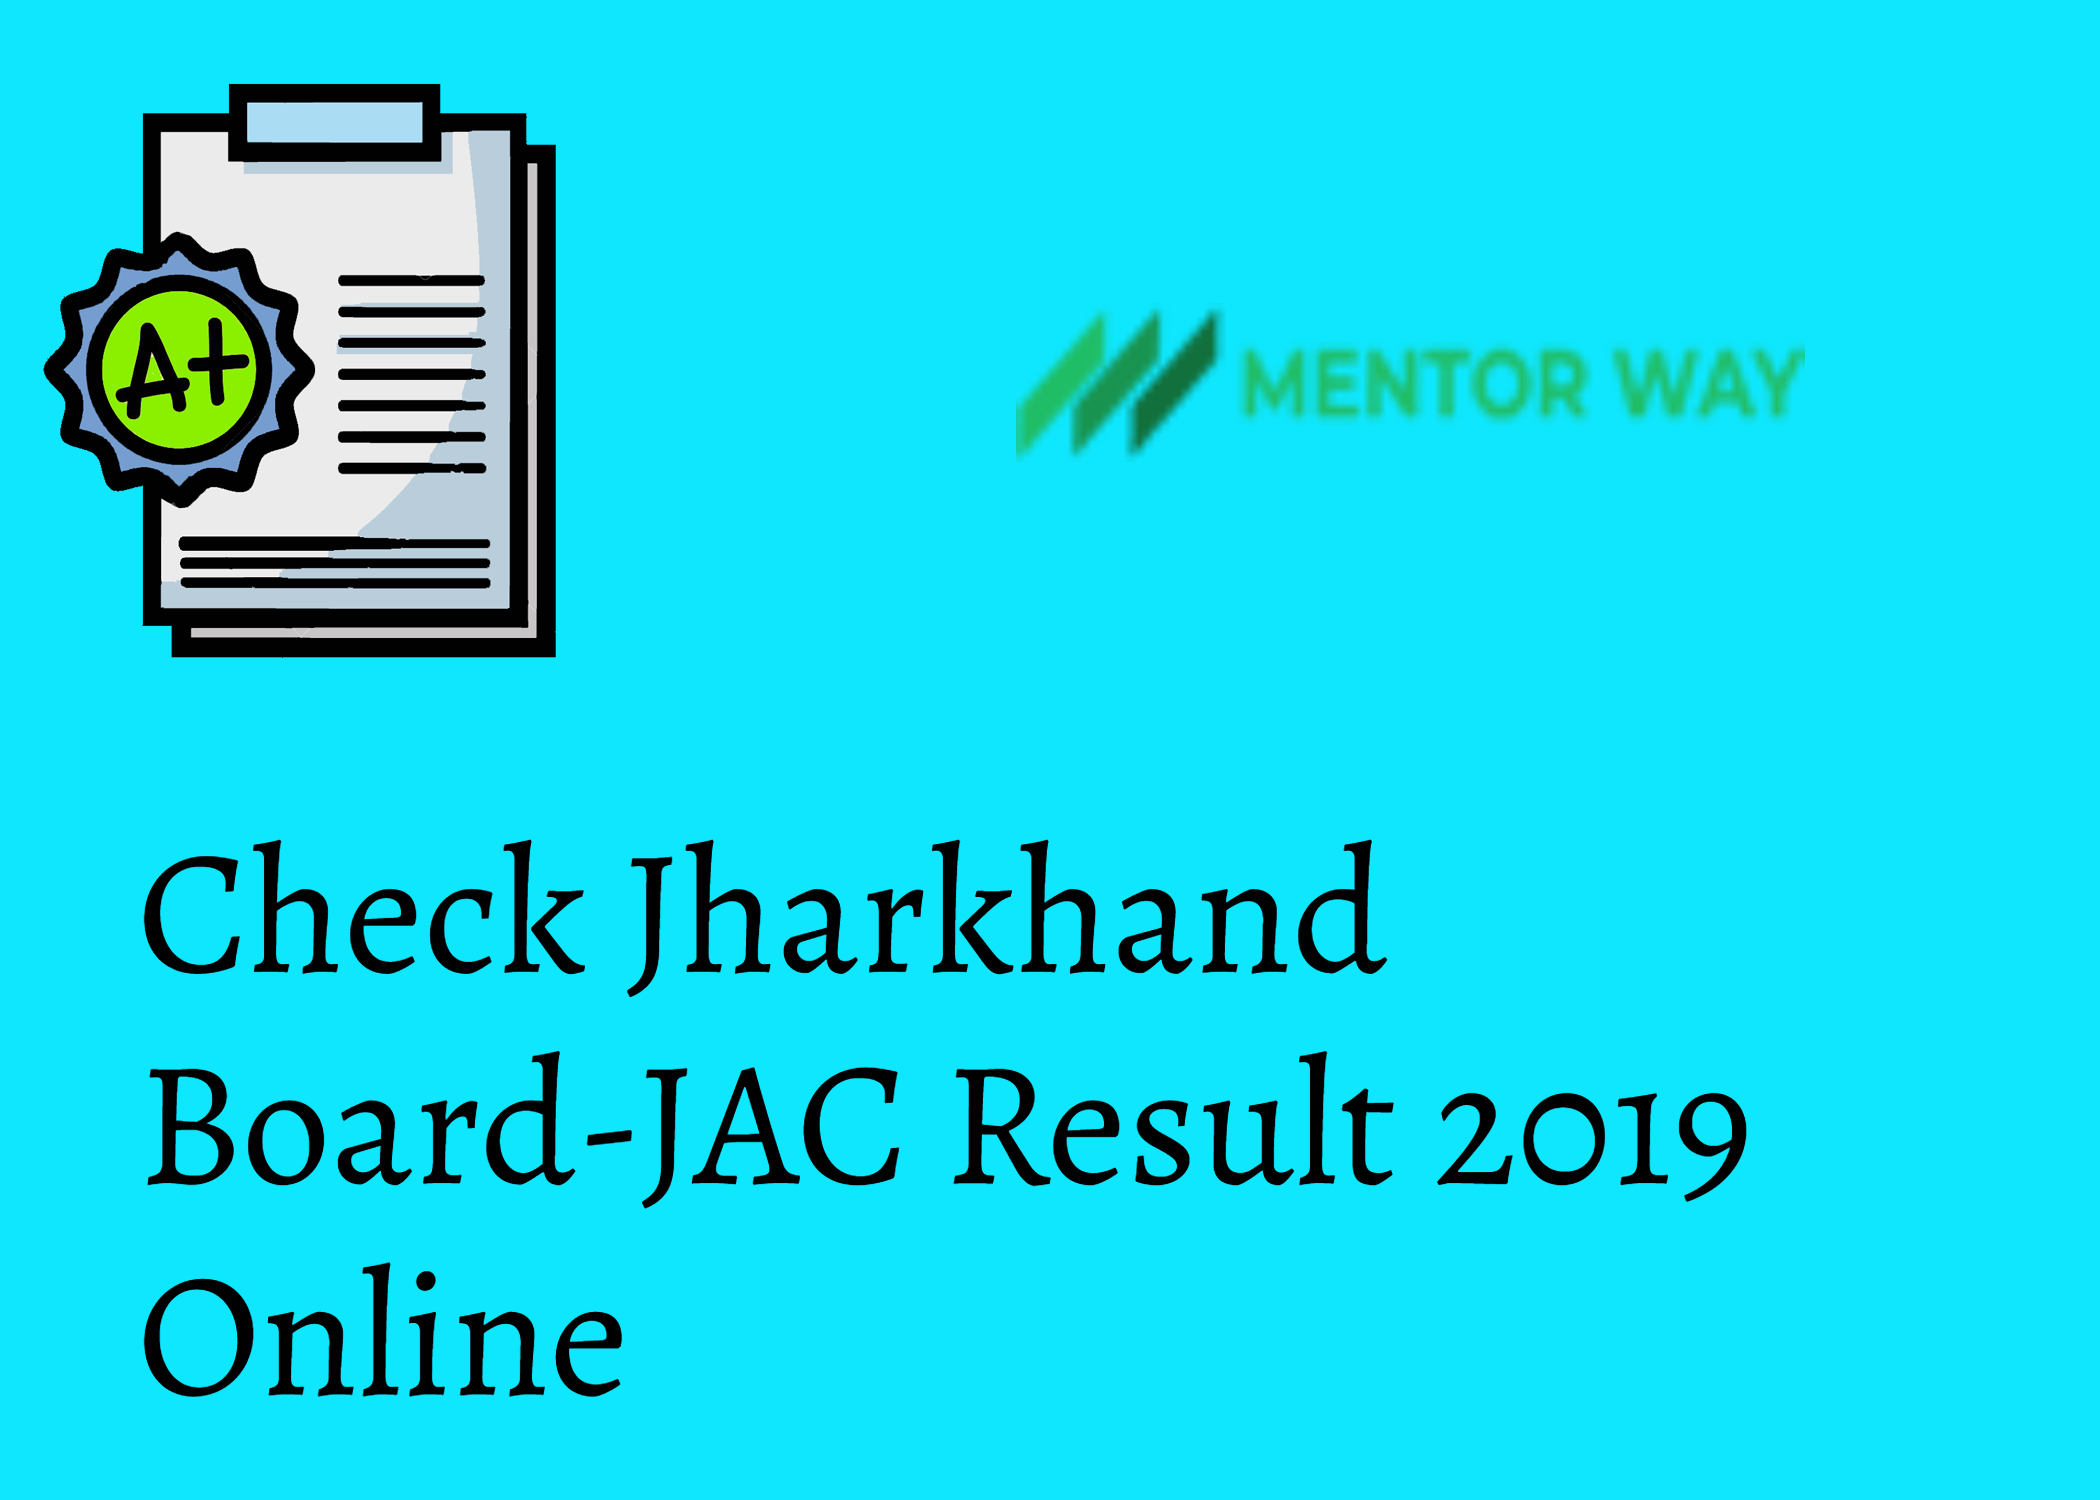 Check Jharkhand Board-JAC Result 2019 Online